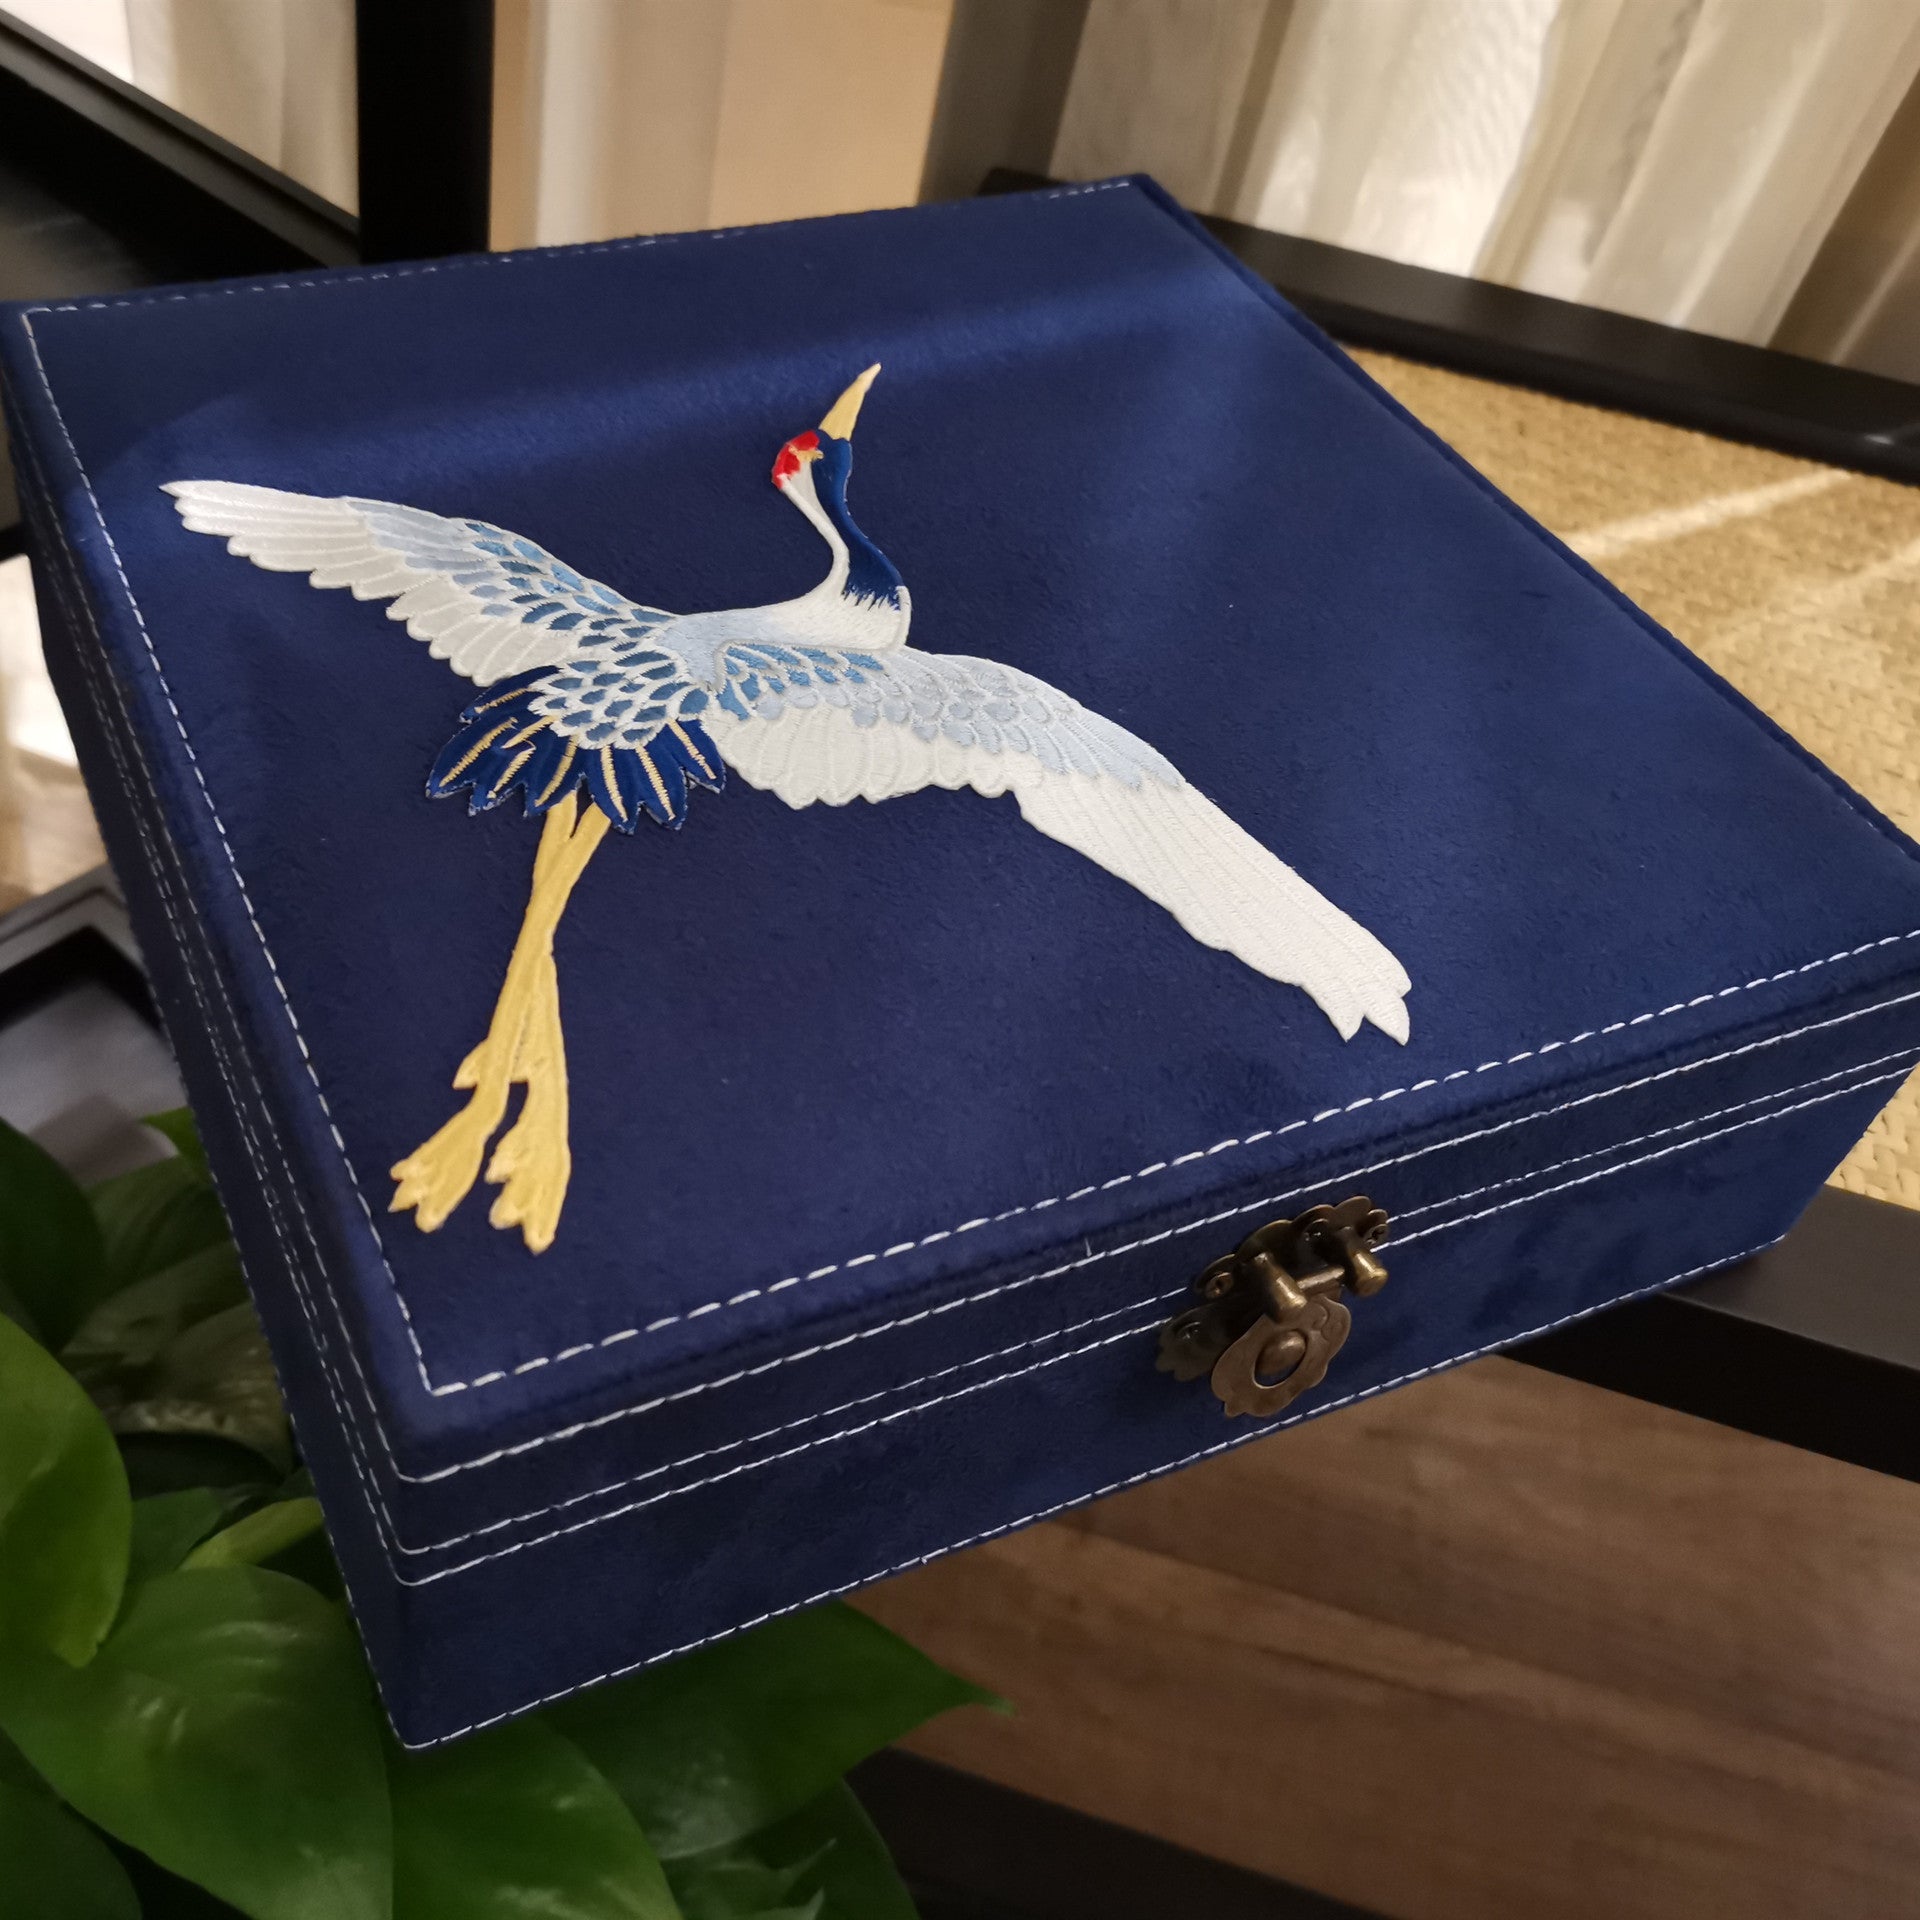 Top Quality Jewelry Box in Vintage Style with Embroidery, handmade vintage jewelry box